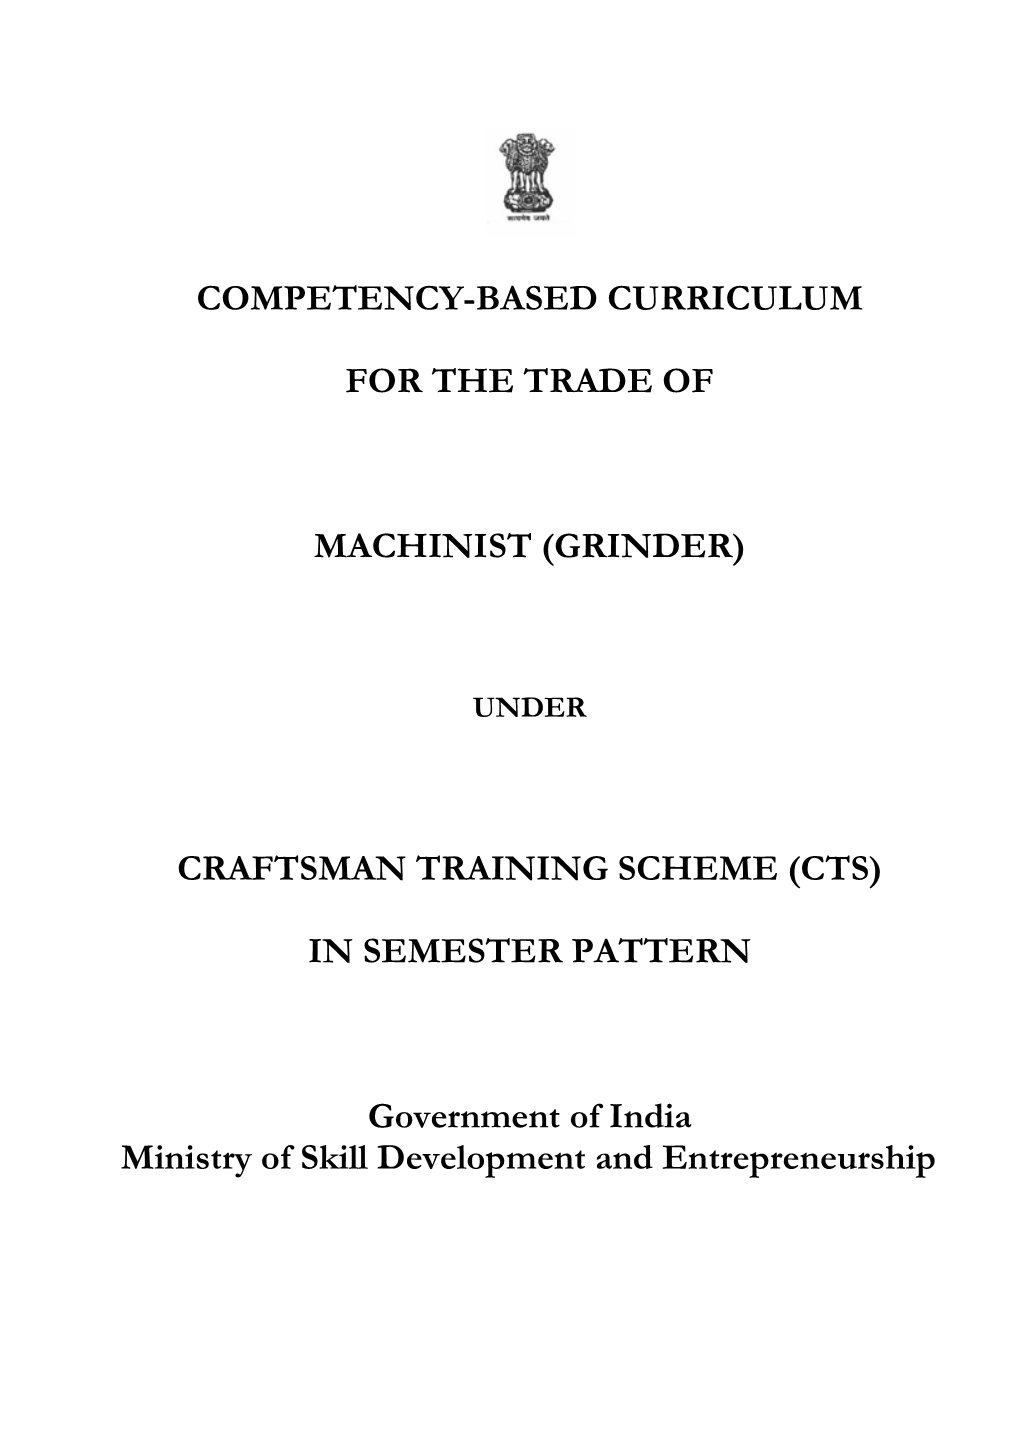 COMPETENCY-BASED CURRICULUM for the TRADE of MACHINIST (GRINDER) CRAFTSMAN TRAINING SCHEME (CTS) in SEMESTER PATTERN Government